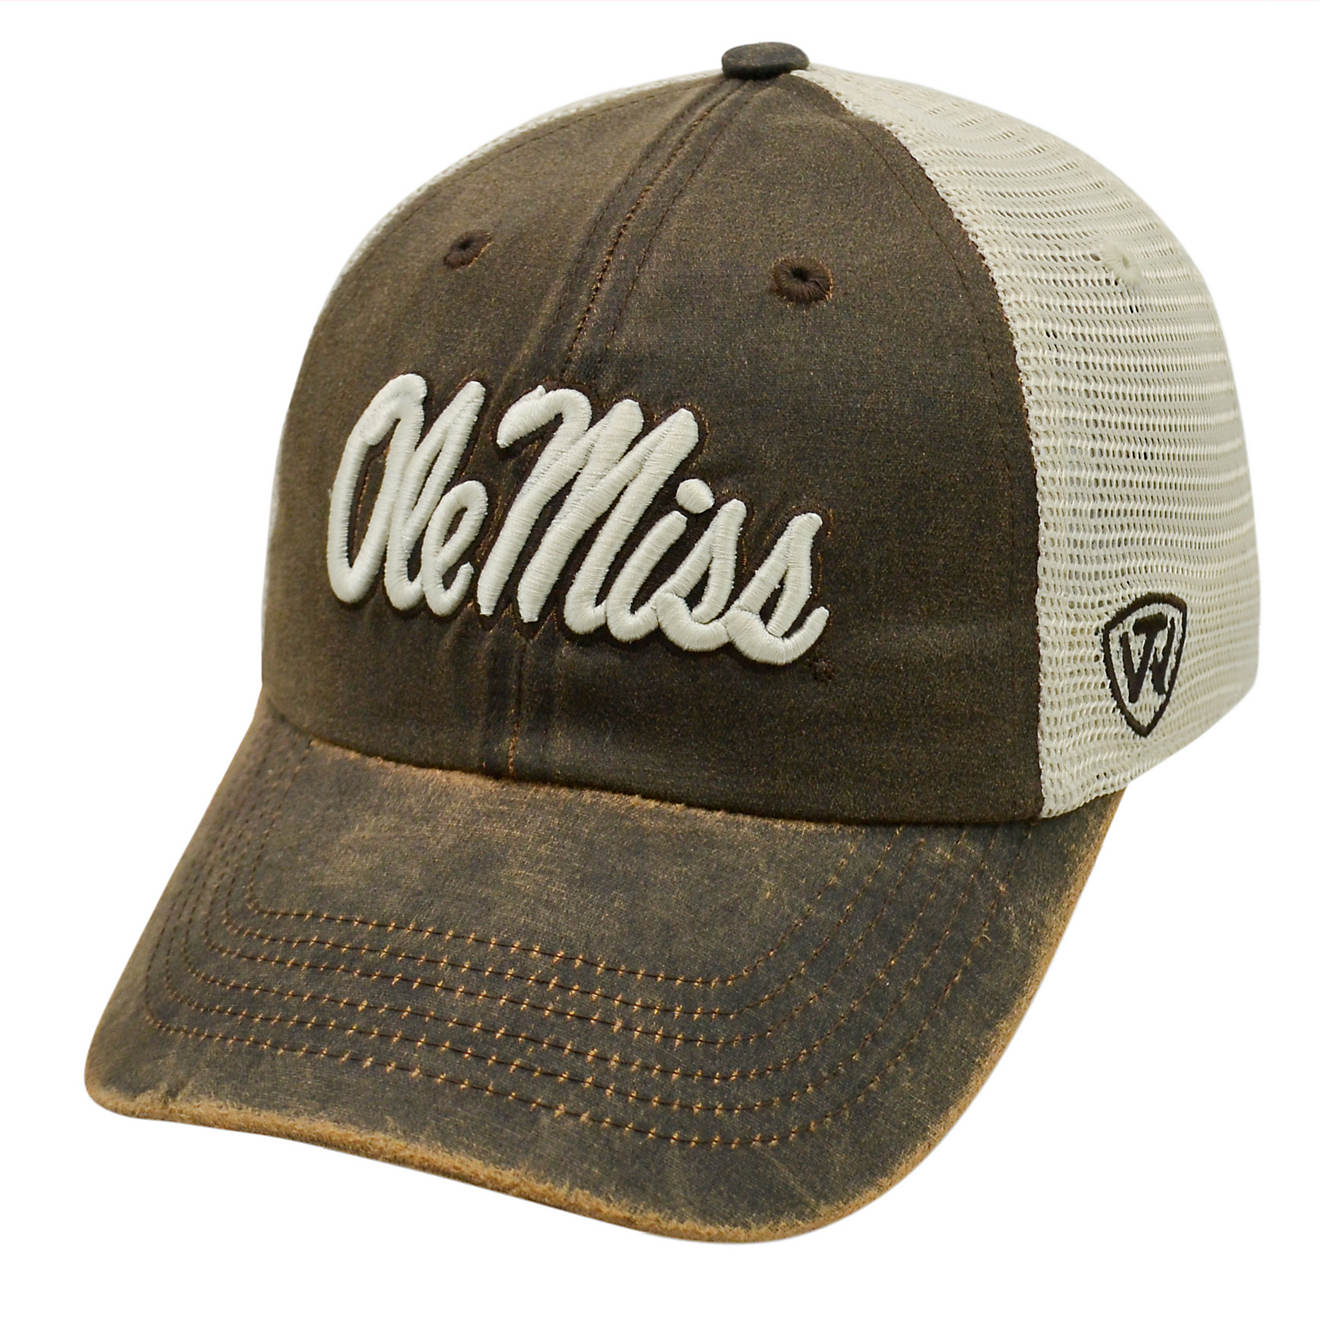 Top of the World Adults' ScatMesh University of Mississippi Cap                                                                  - view number 1